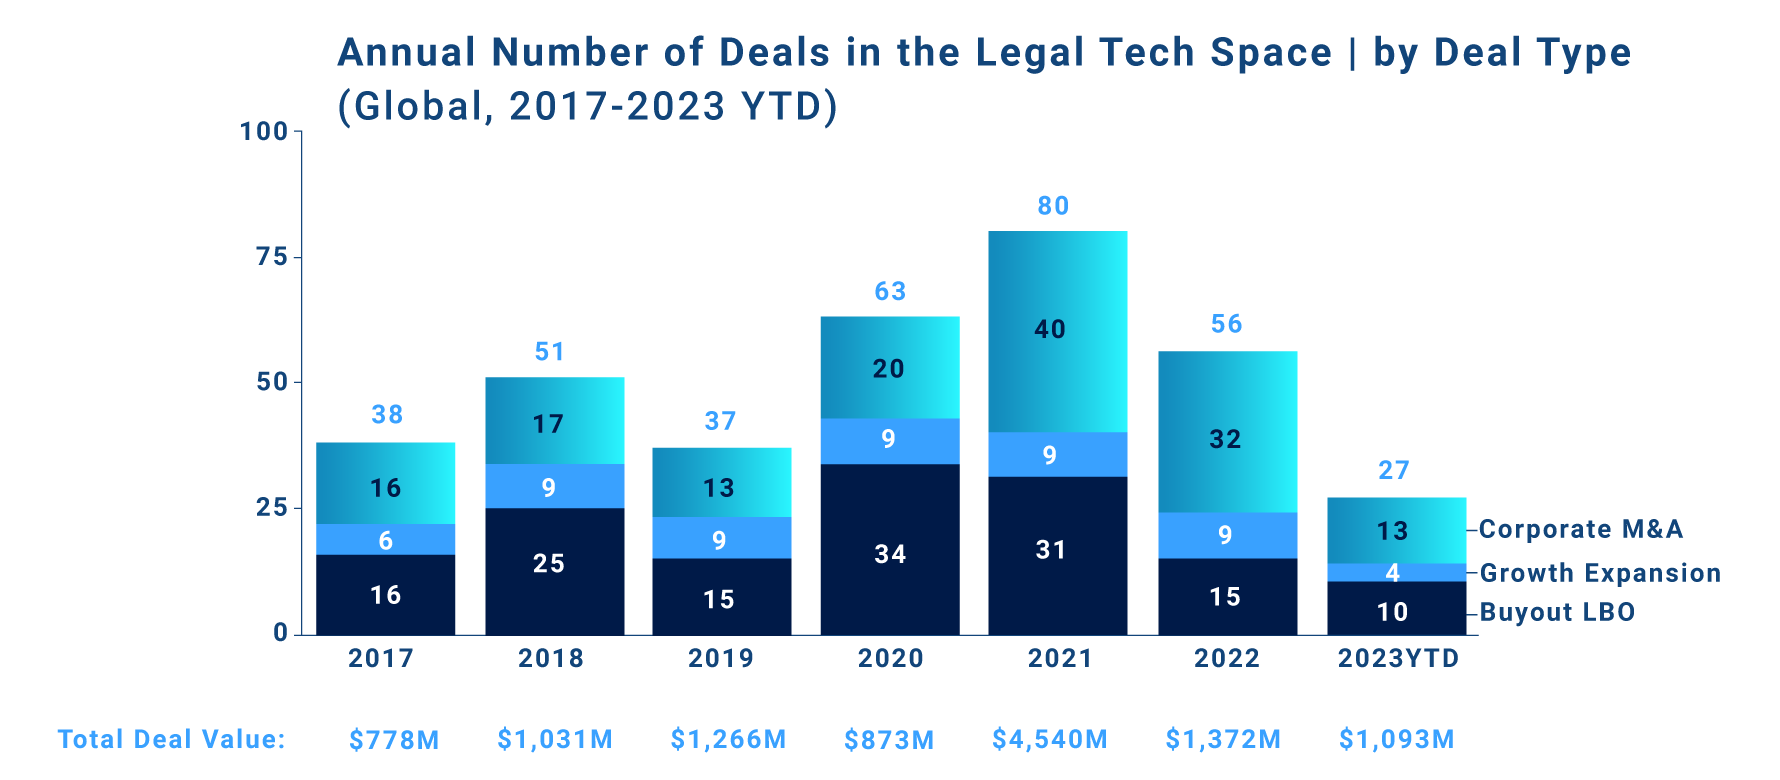 A graphic showing the annual number of global deals in the legal tech space (by deal type) from 2017-now.  Deal types are corporate M&A, growth expansion, and buyout LBO.